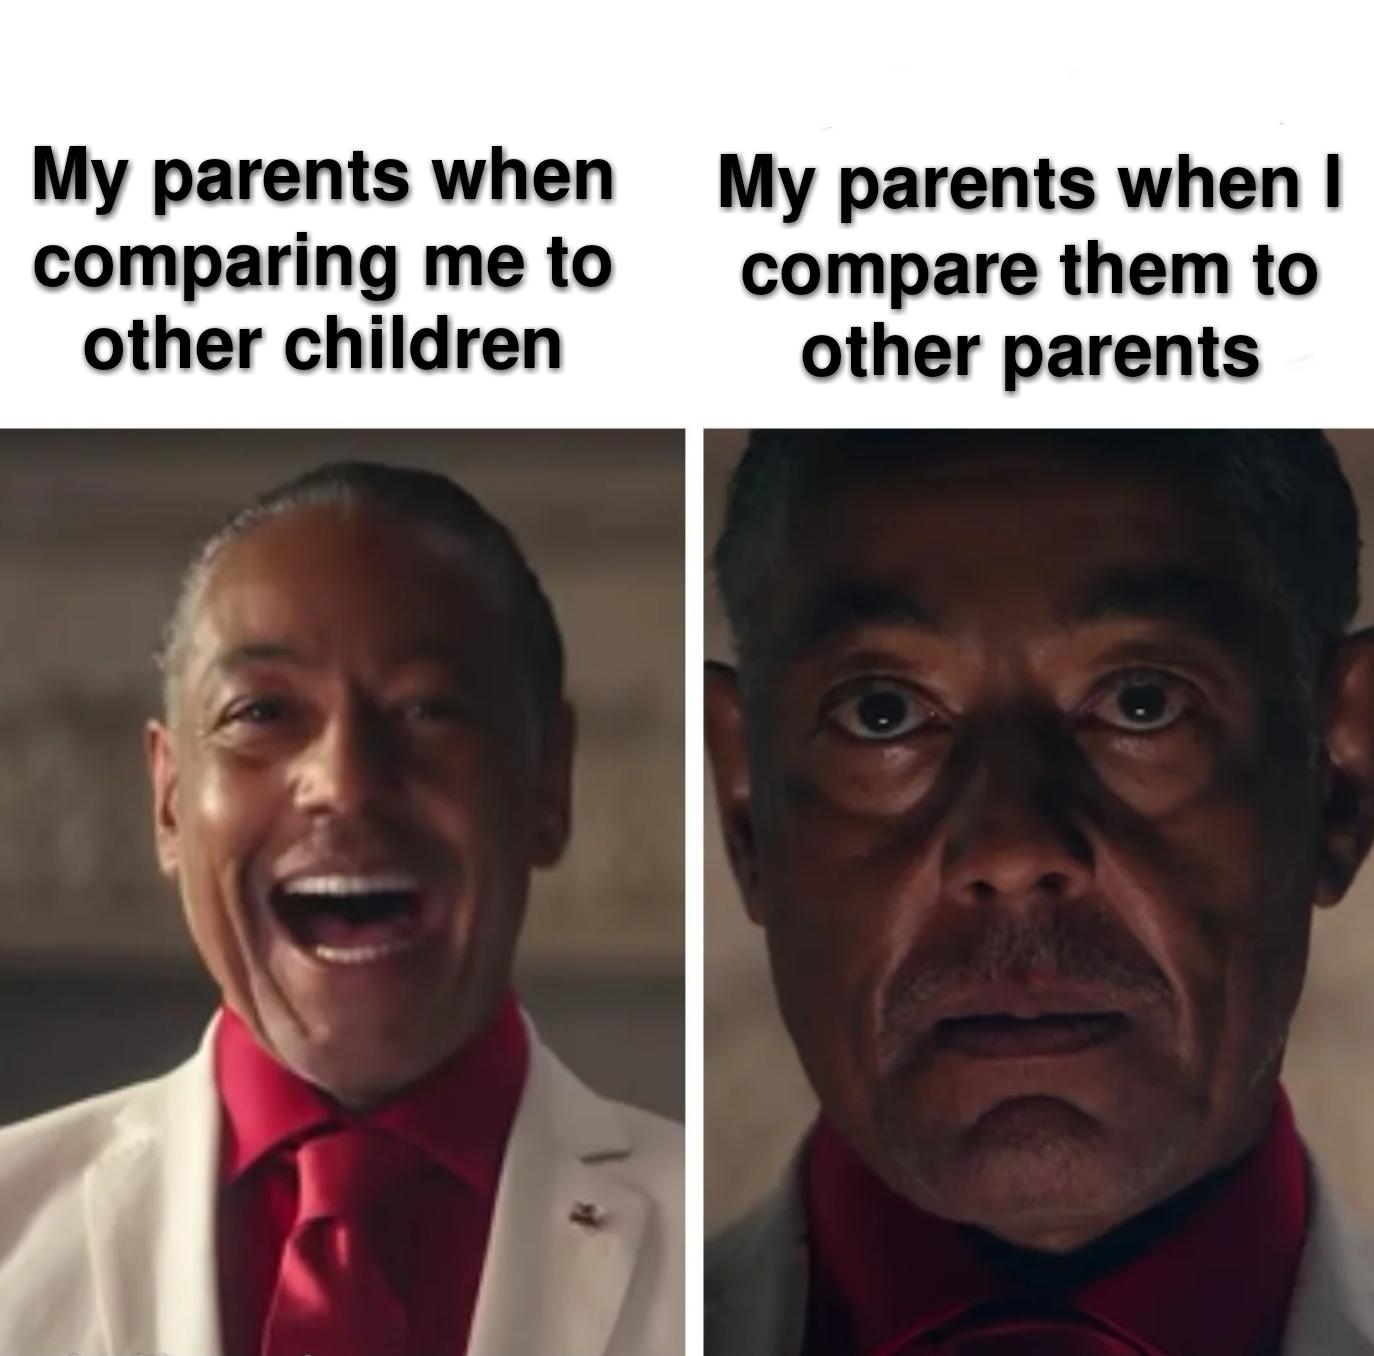 giancarlo esposito i was acting - My parents when comparing me to other children My parents when I compare them to other parents